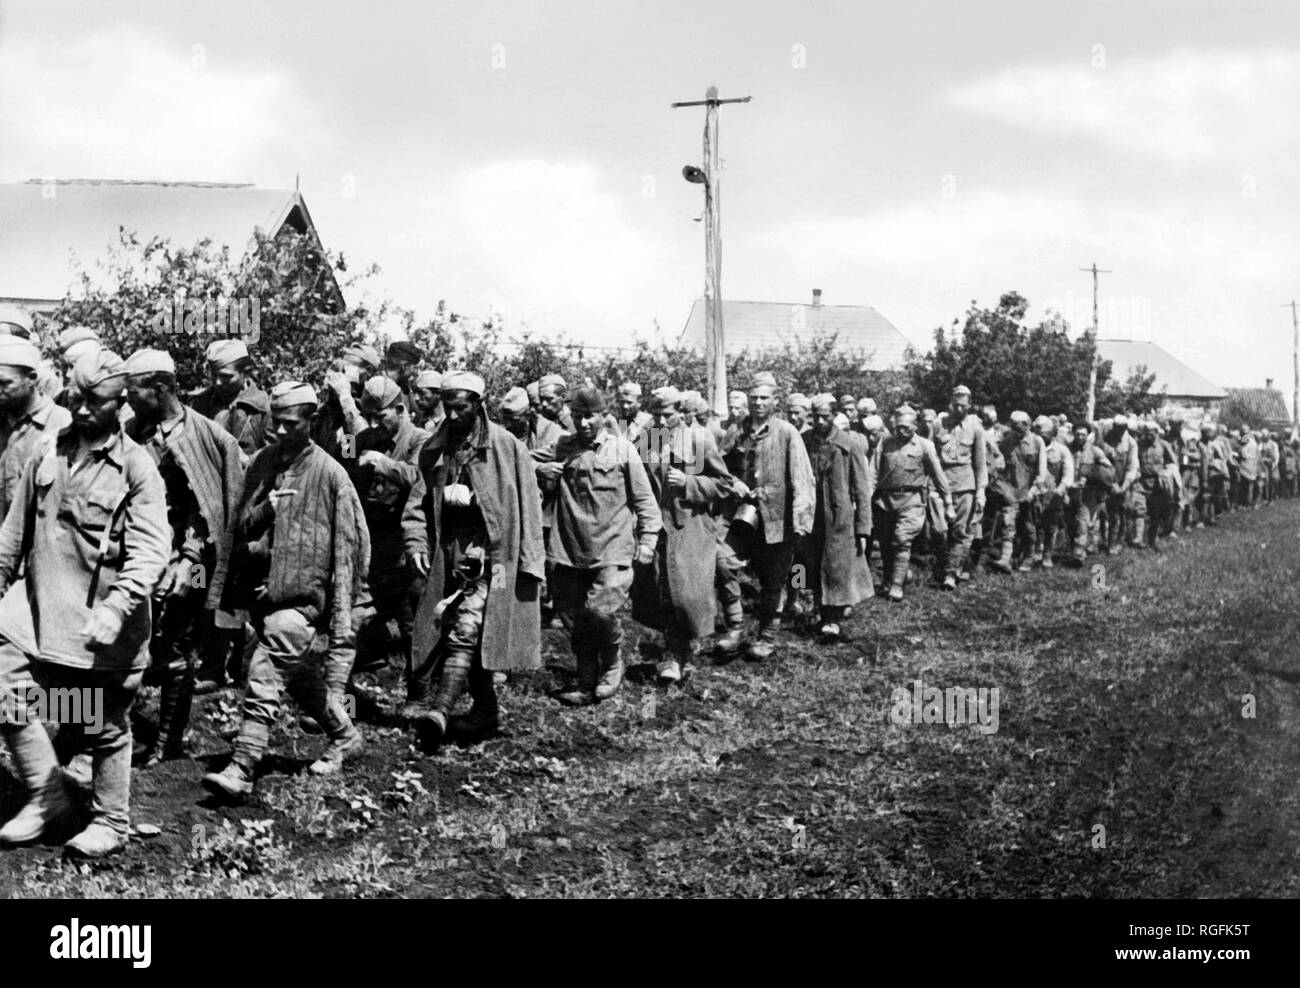 russian prisoners to the concentration camp, second world war, 1942 Stock Photo